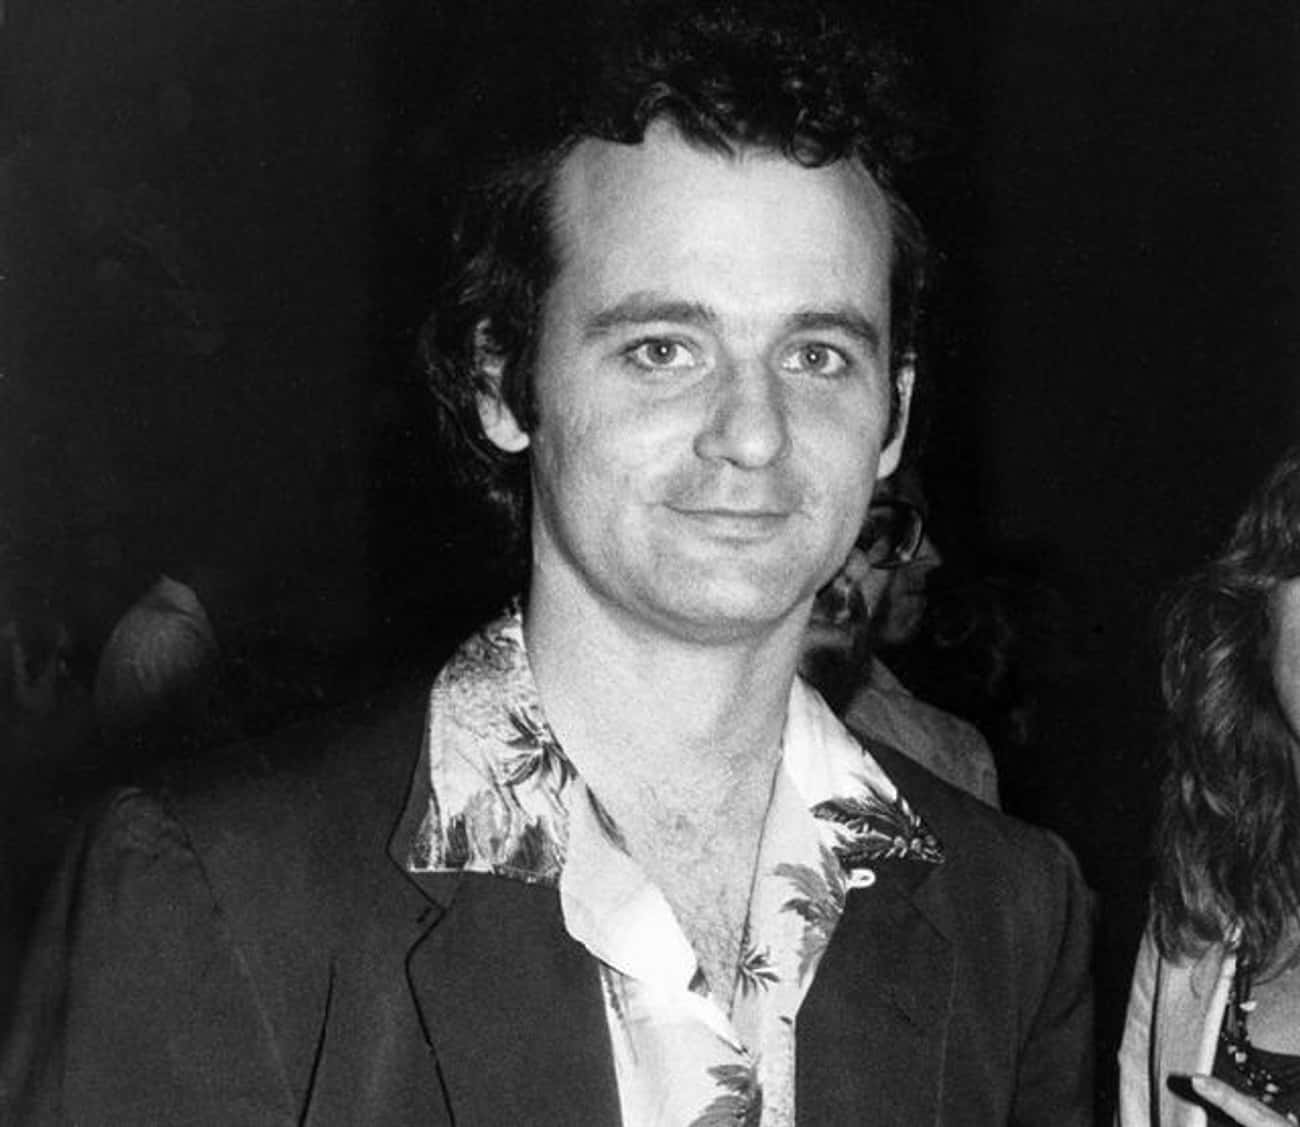 Young Bill Murray in a Black Coat and Hawiian Style Shirt